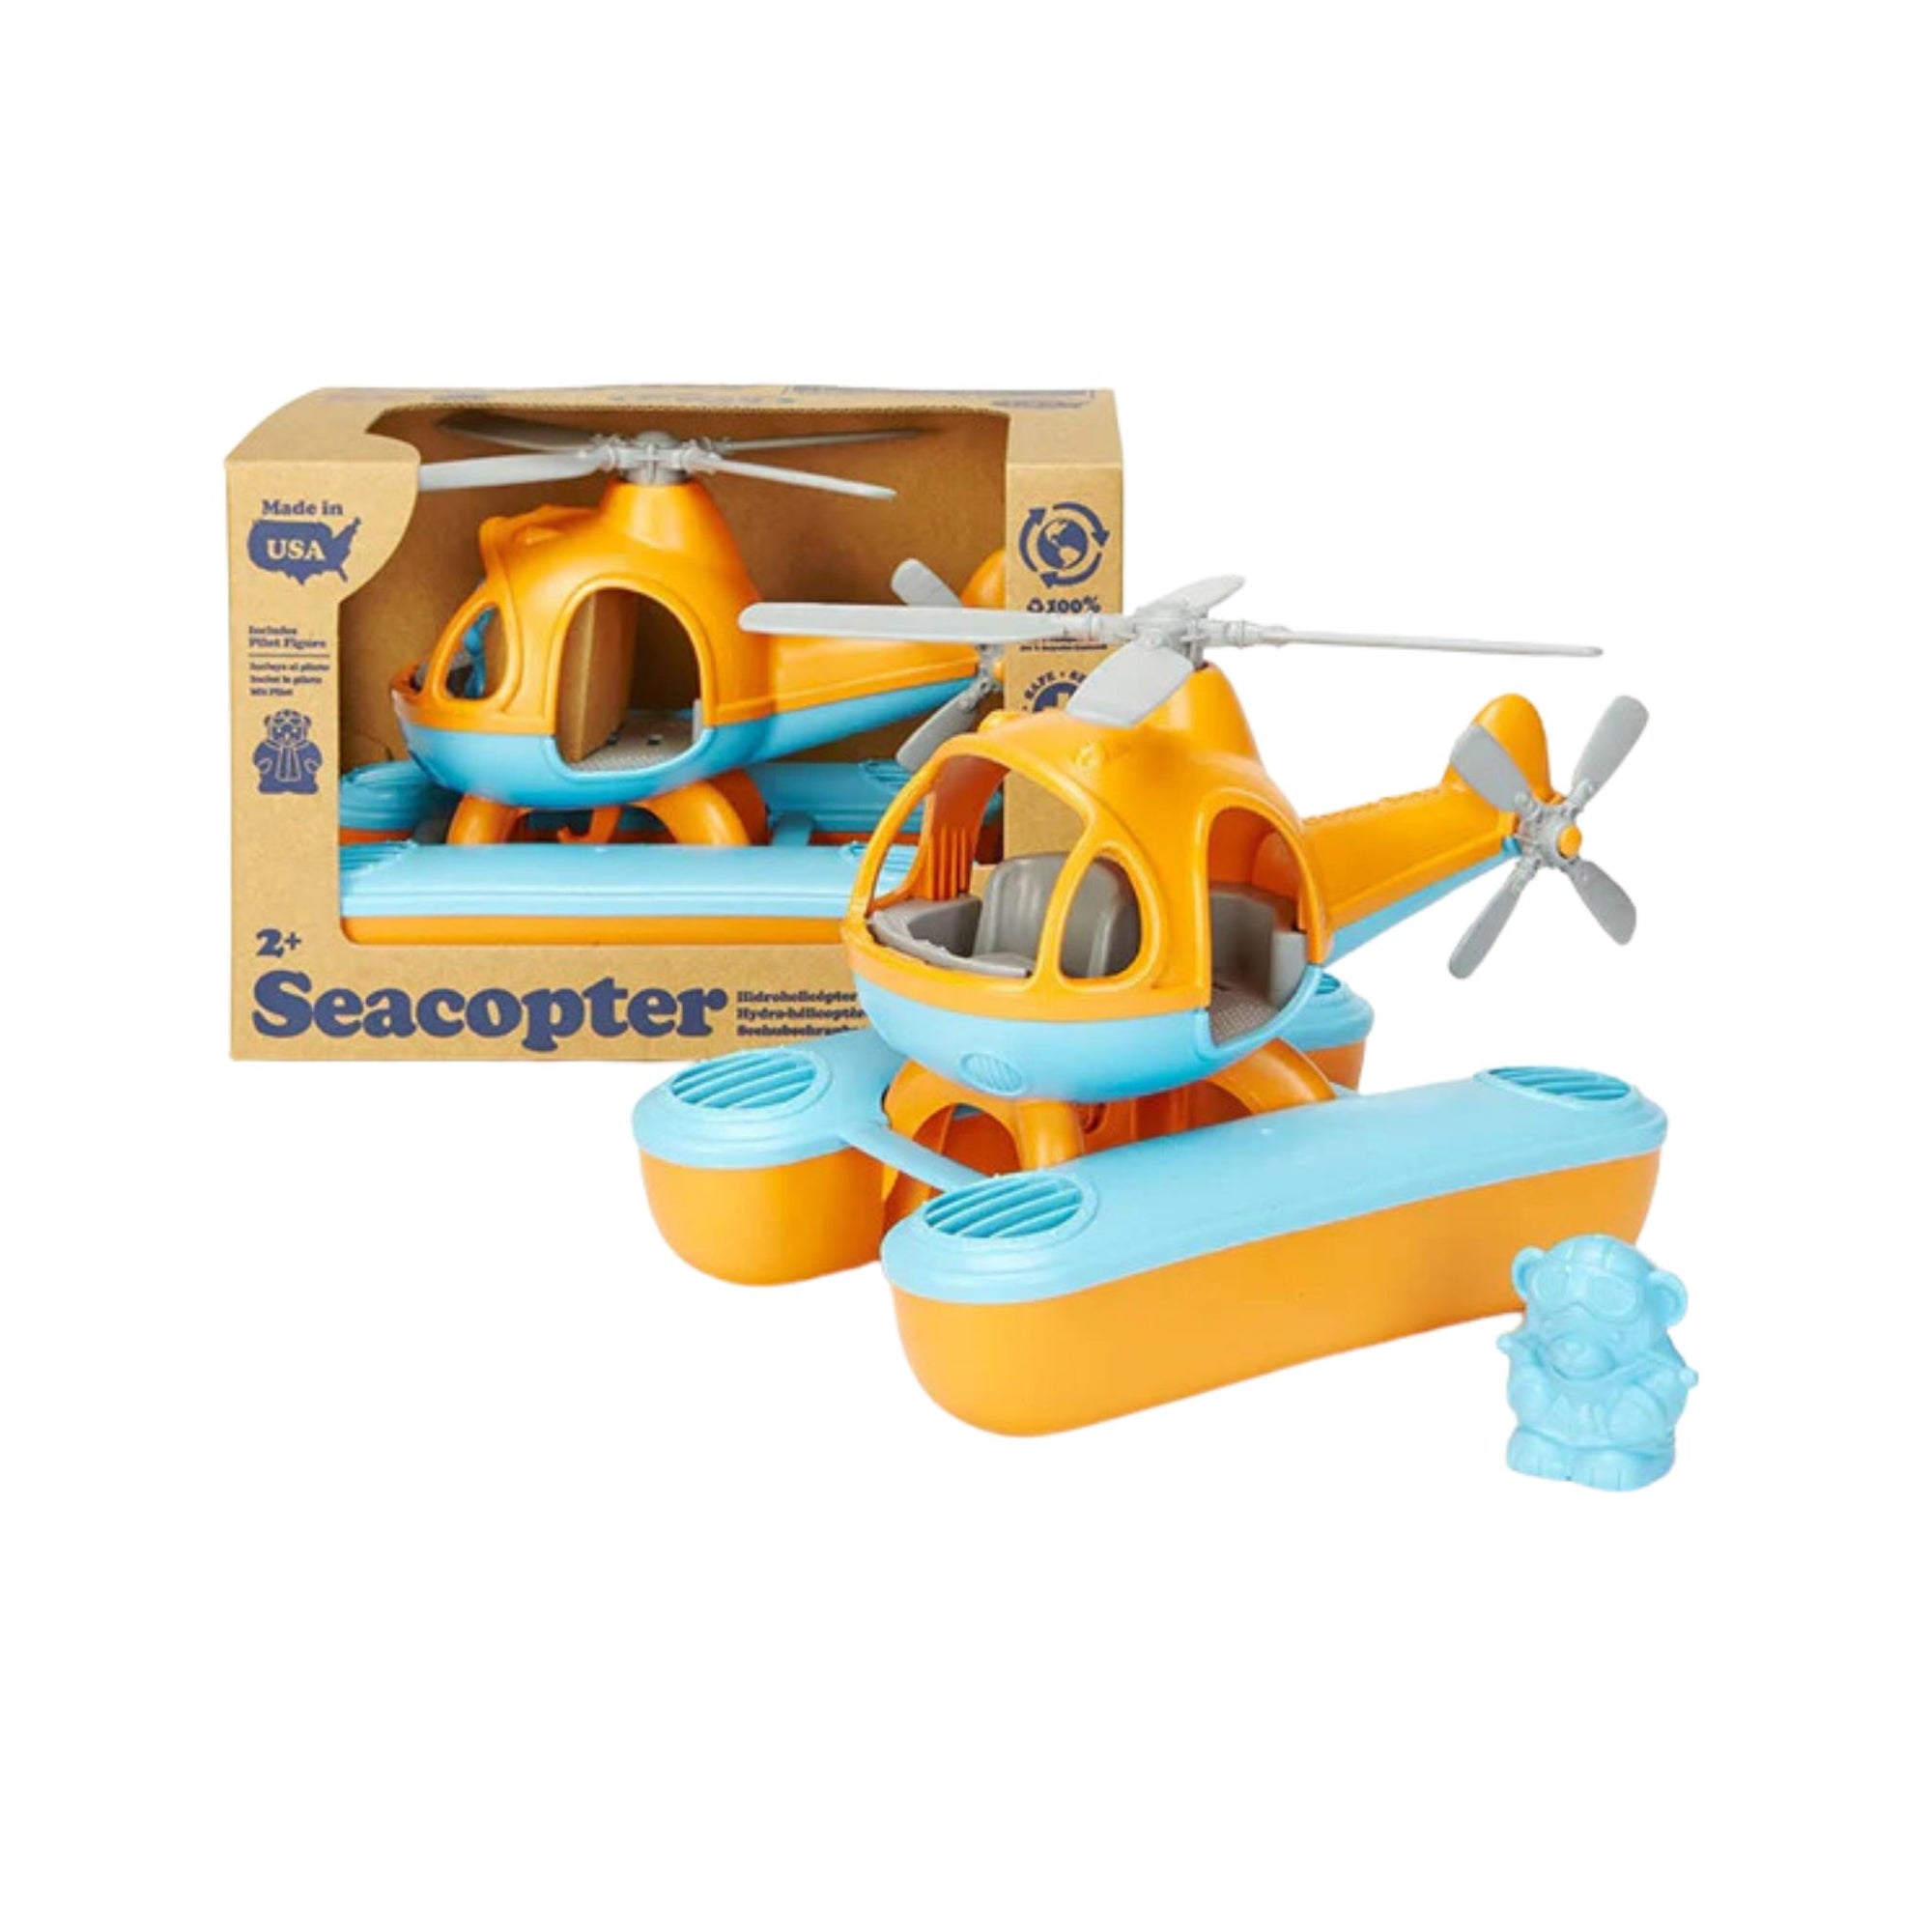 Green Toys Seacopter - Orange Top / Blue